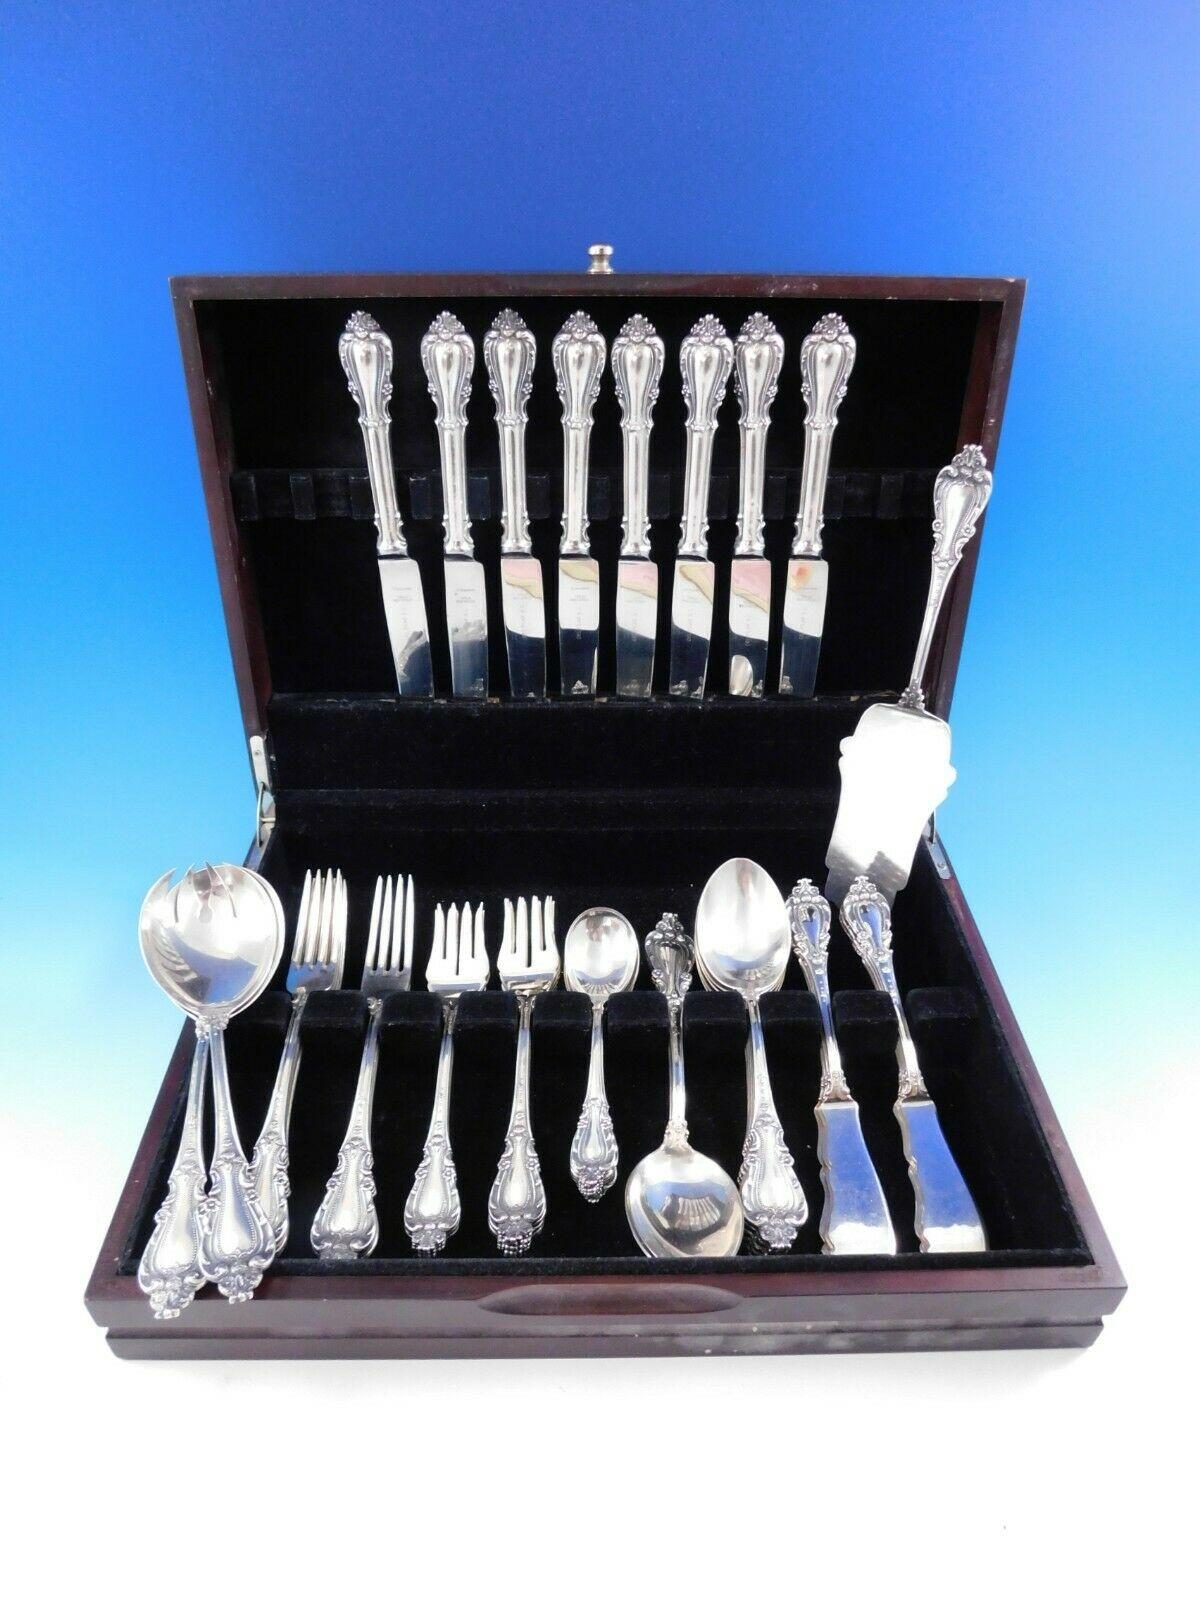 Dinner size Florencia by Plateria de Pilar Peruvian sterling silver flatware set, 50 pieces. This set includes:

8 dinner knives, 9 7/8